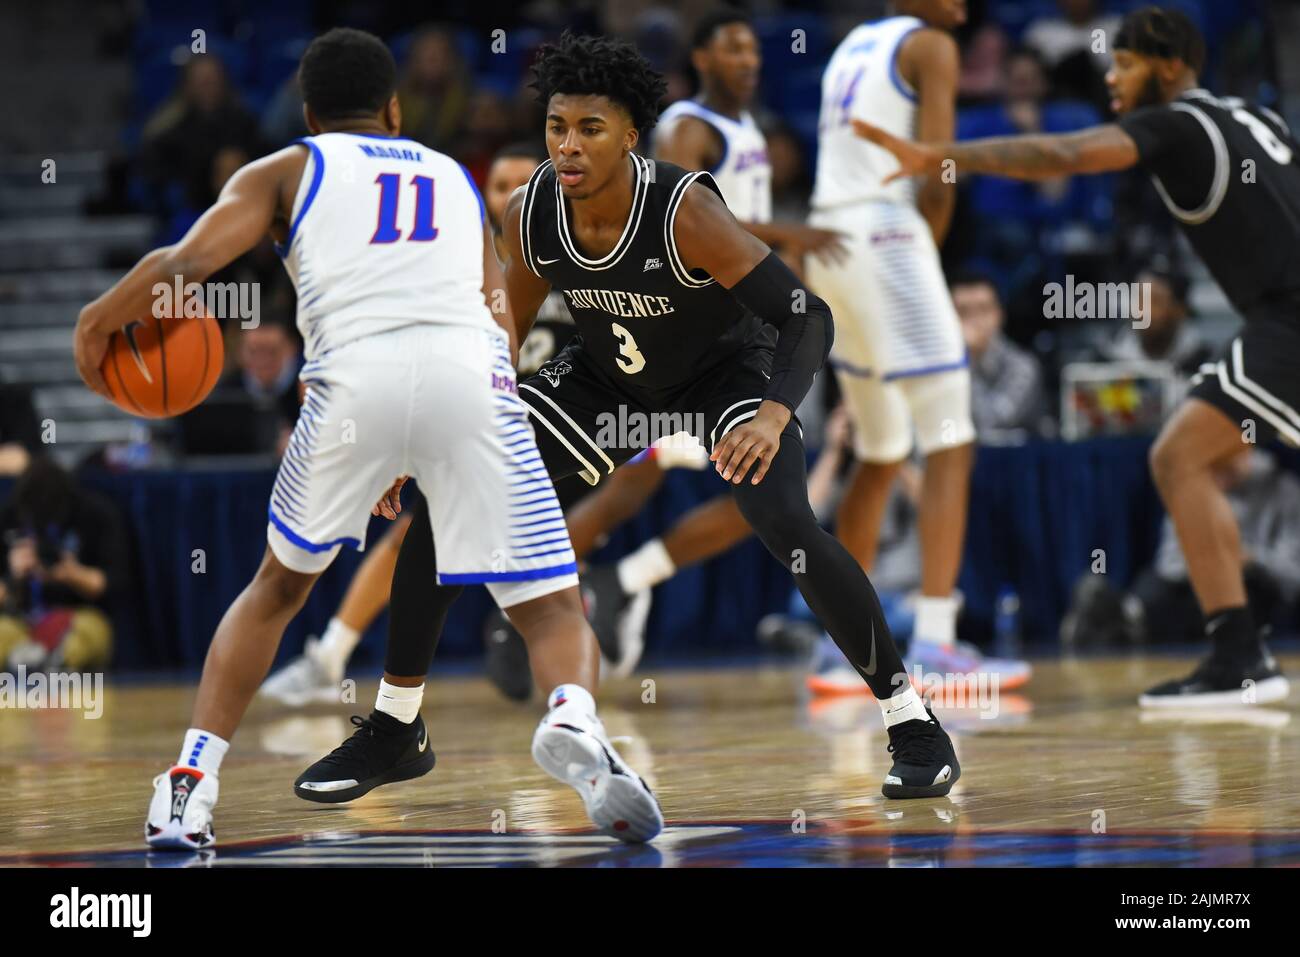 Chicago, Illinois, USA. 04th Jan, 2020. Providence Friars guard David Duke (3) in action during the NCAA Big East conference basketball game between DePaul vs Providence at Wintrust Area in Chicago, Illinois. Dean Reid/CSM/Alamy Live News Stock Photo